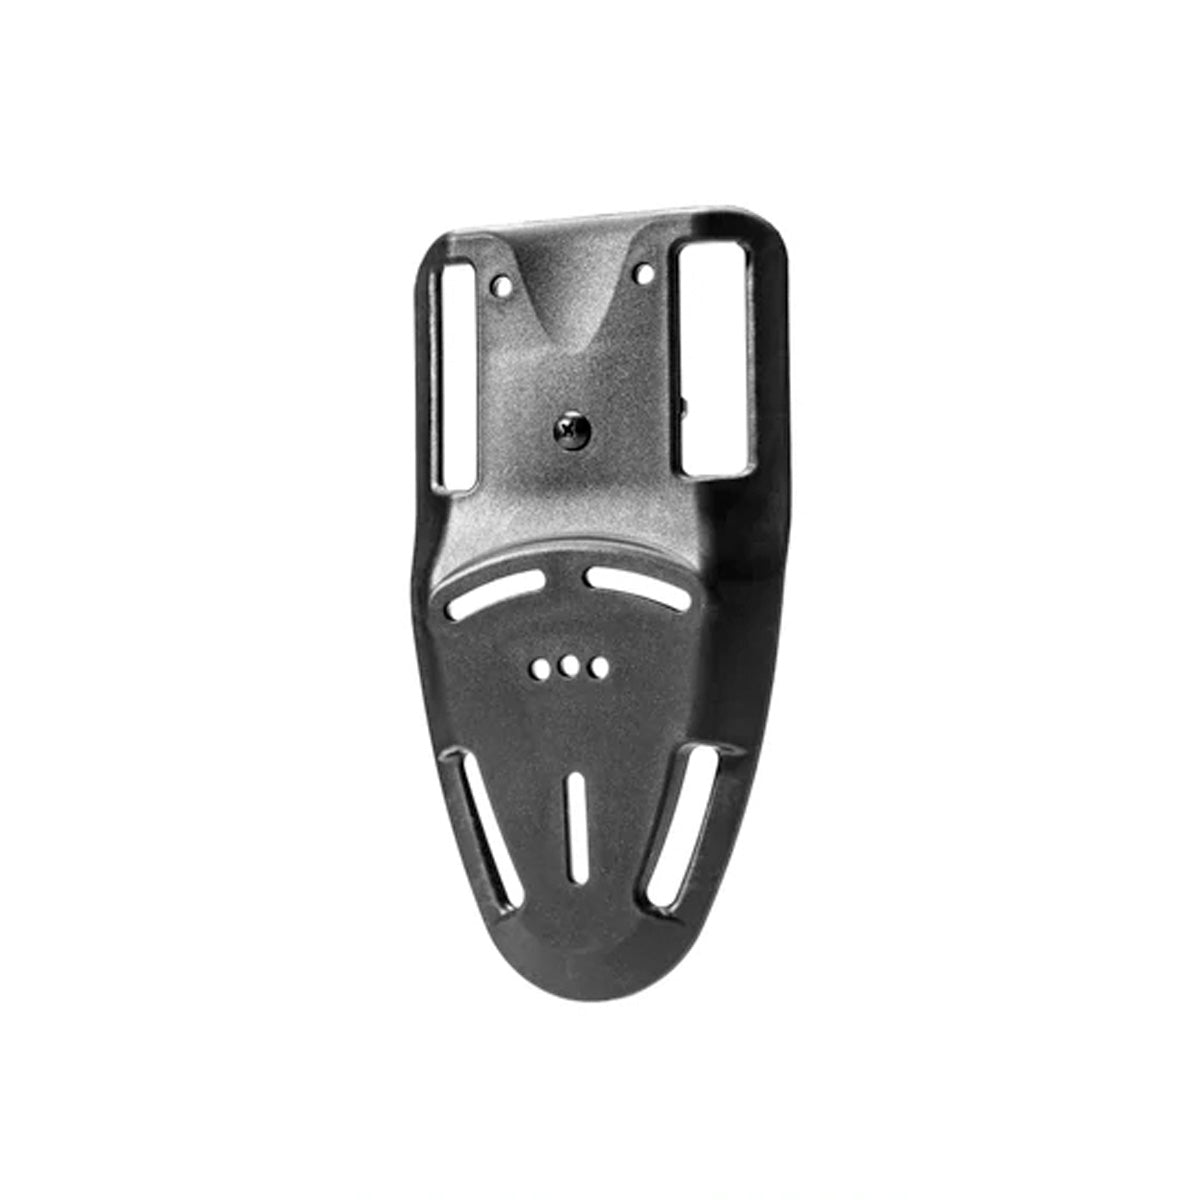 Blade-Tech Duty Drop and Offset Accessories Blade-Tech Holsters Without Hardware (Bulk) Tactical Gear Supplier Tactical Distributors Australia